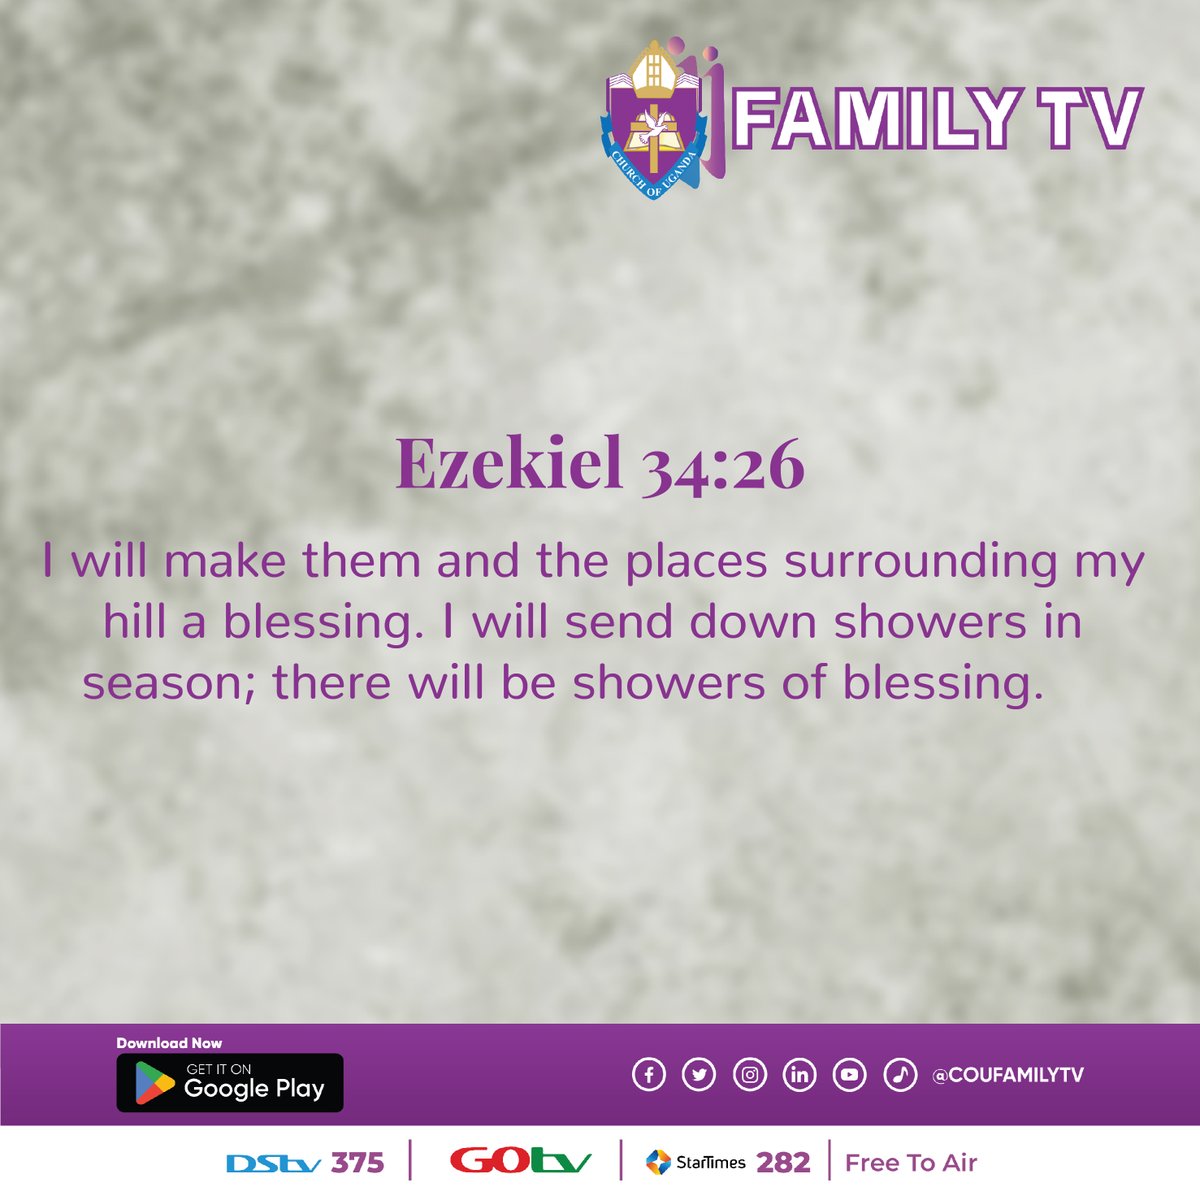 I will make them and the places surrounding my hill a blessing. I will send down showers in season; there will be showers of blessing. (Ezekiel 34:26) NIV
#VerseoftheDay  #enrichinglives